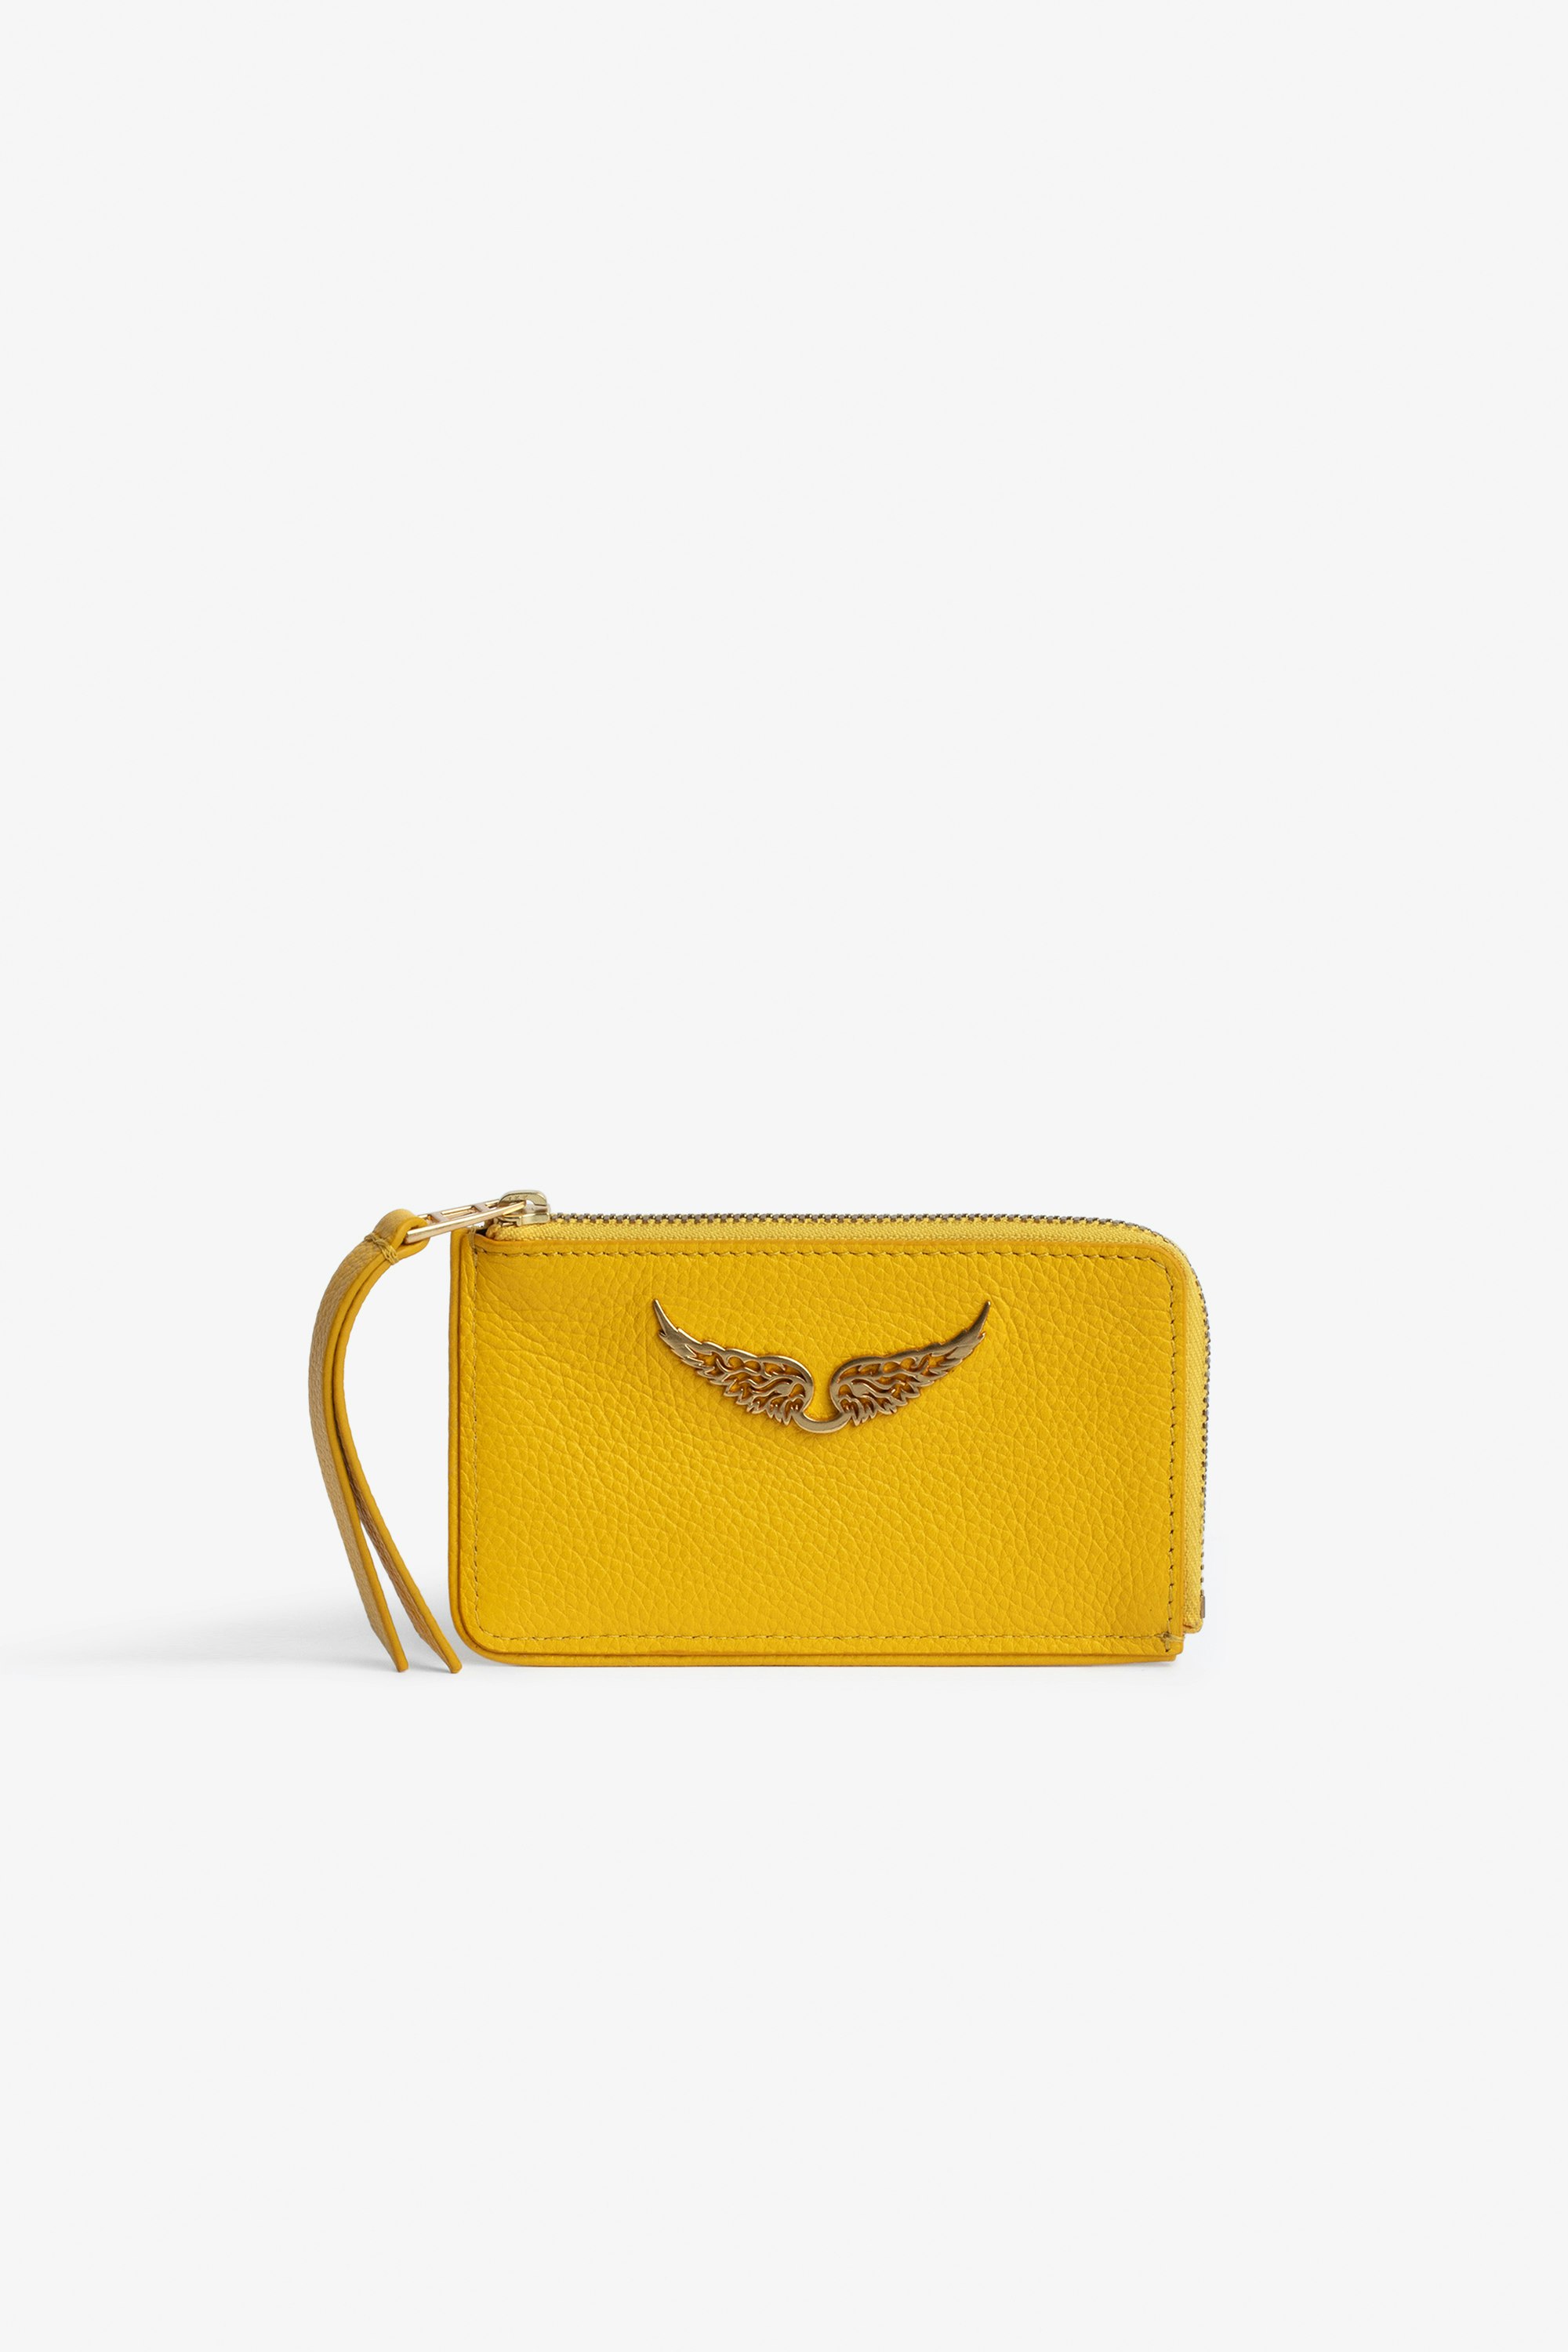 ZV Card 財布 Women’s zipped card holder in yellow grained leather
